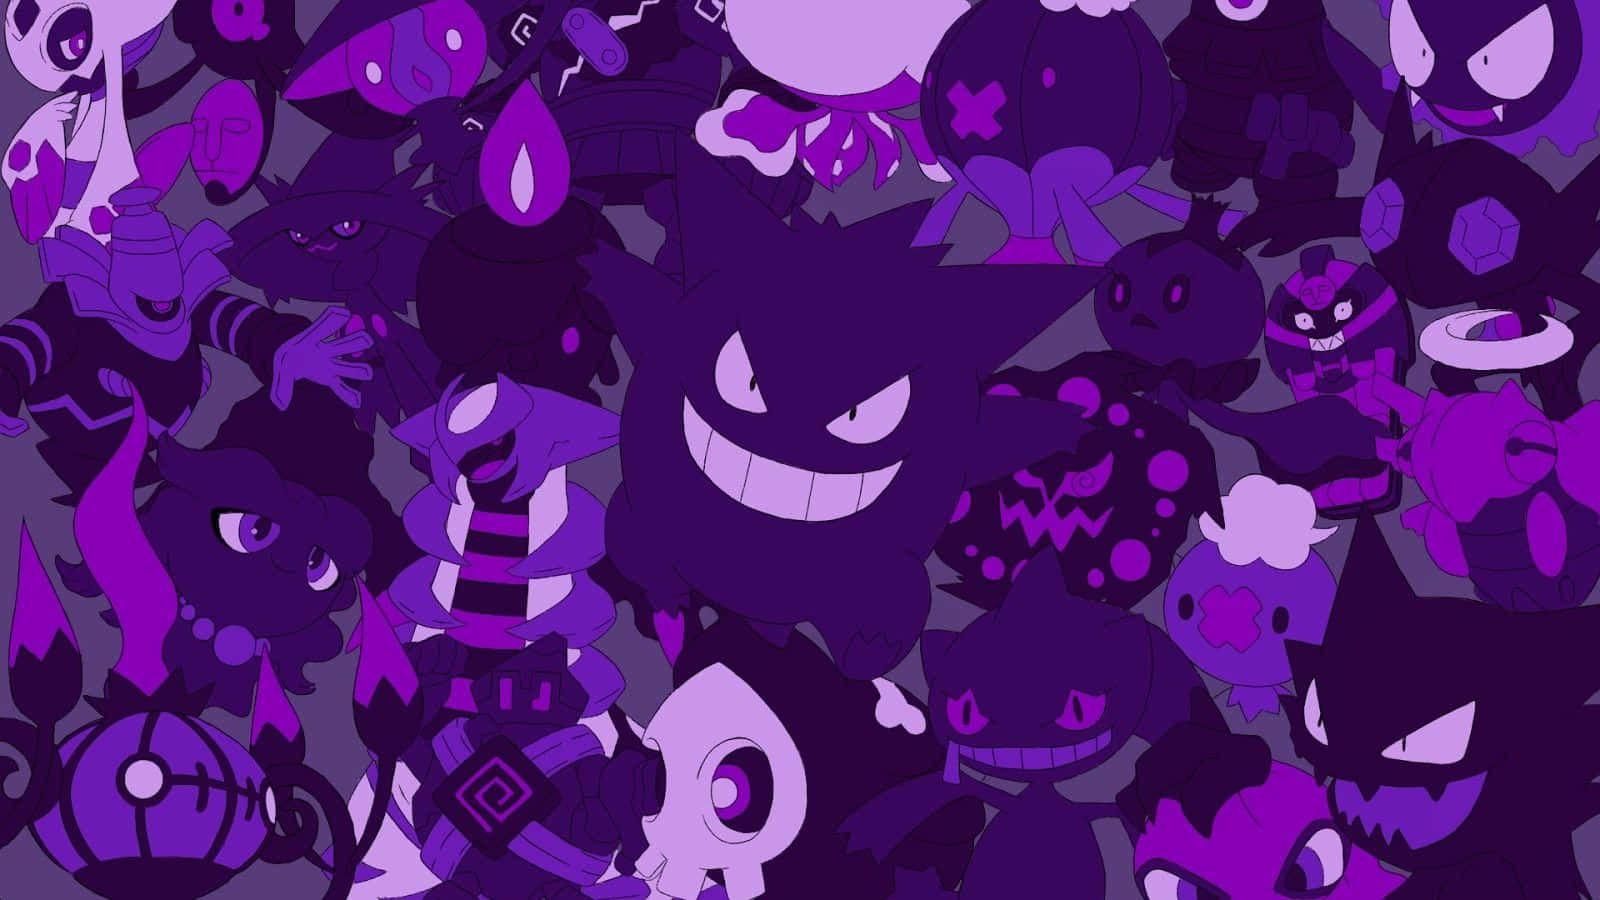 Enchanting Phantump In The Mystical Forest Wallpaper